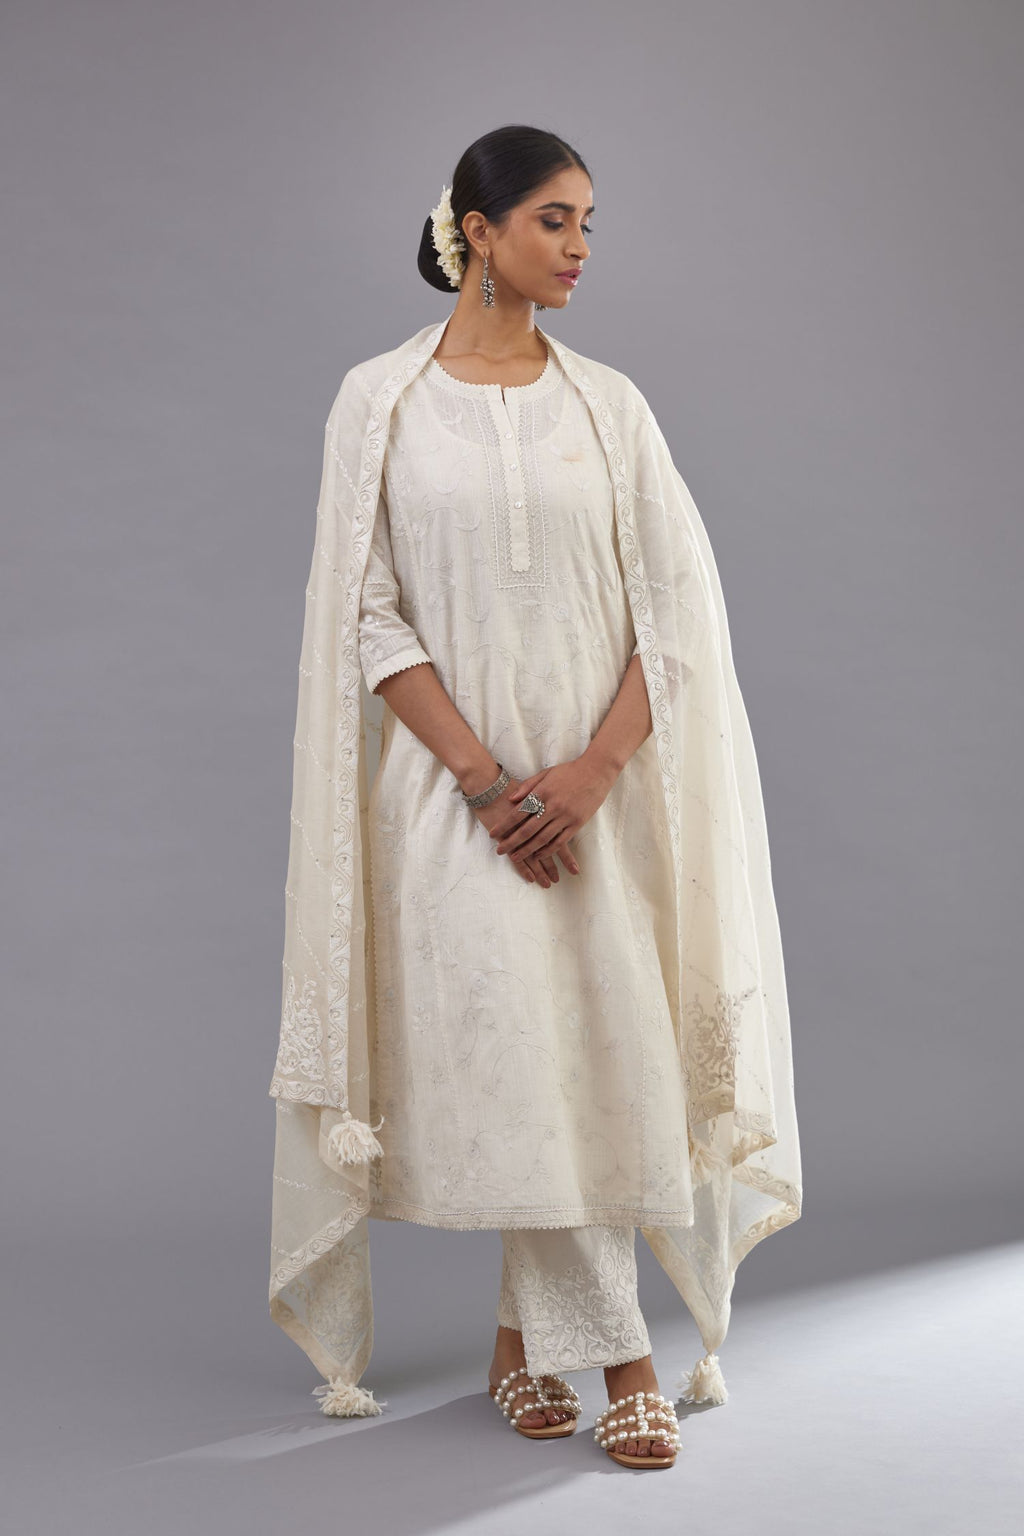 Off-white Handspun handwoven cotton kurta set with all-over jaal embroidery and small assorted flowers embroidery at side panells, highlighted with sequins handwork.